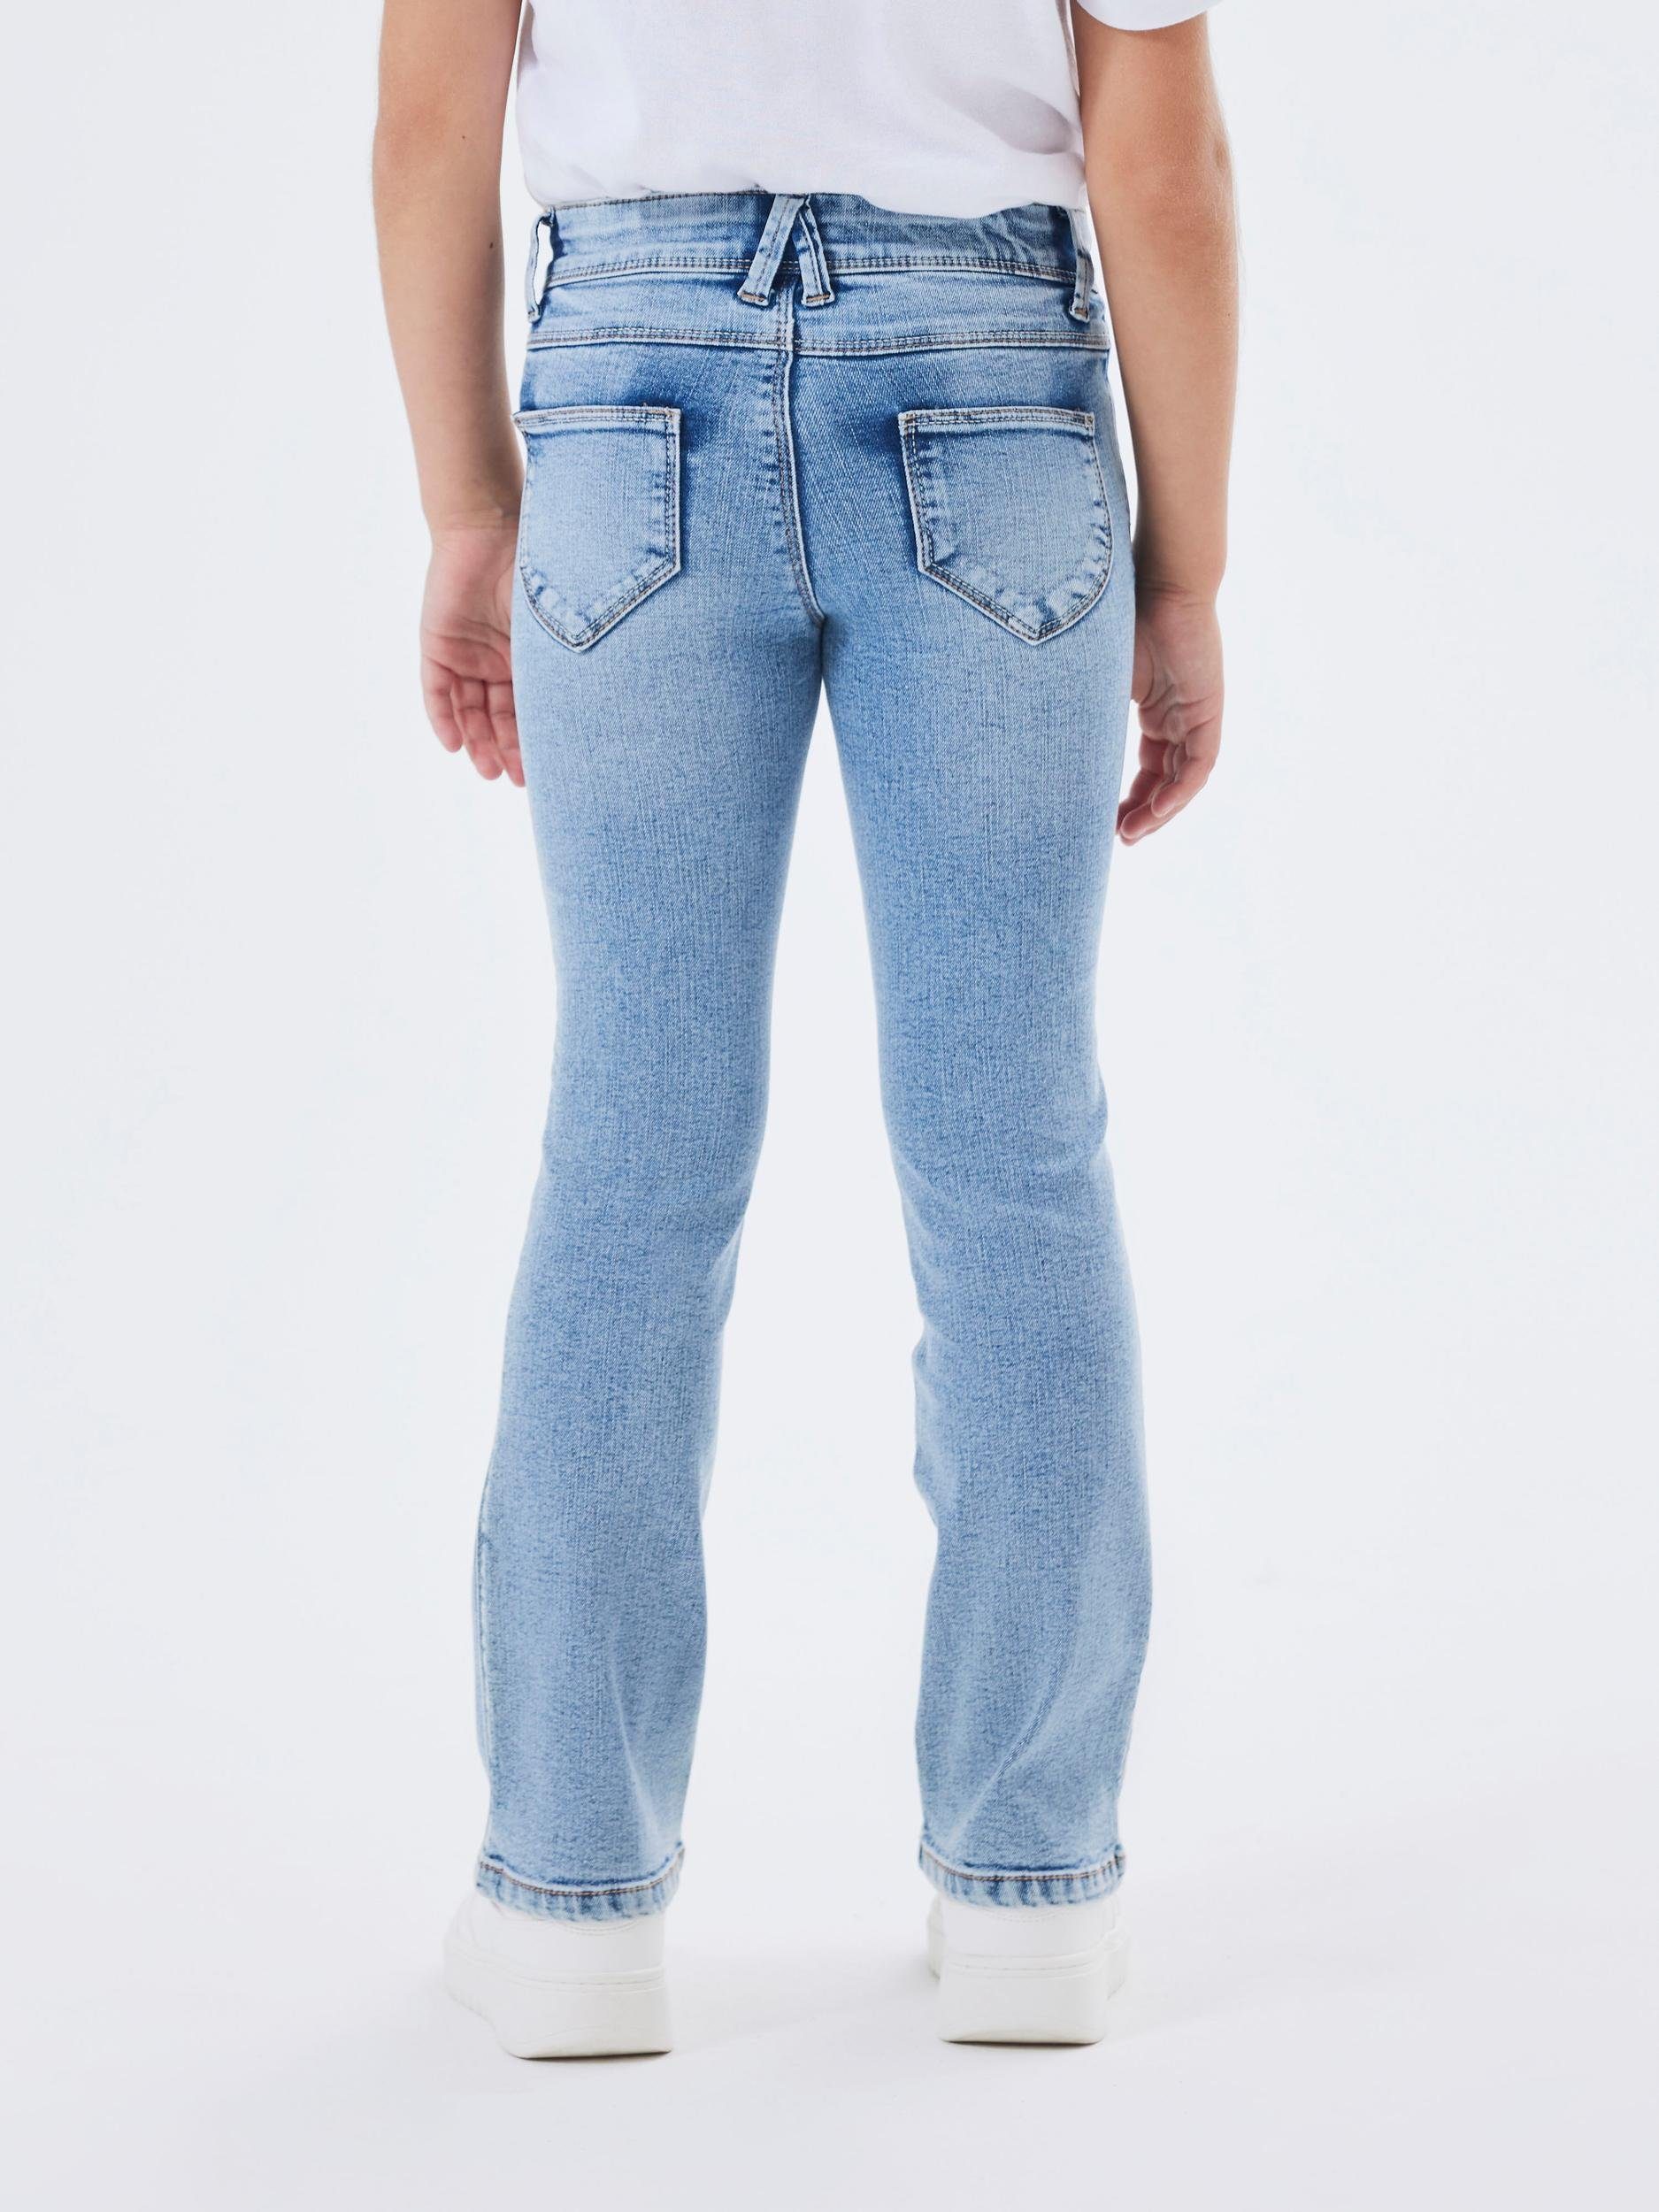 mit It Bootcut-Jeans Denim SKINNY Stretch 1142-AU JEANS NOOS Light BOOT NKFPOLLY Blue Name